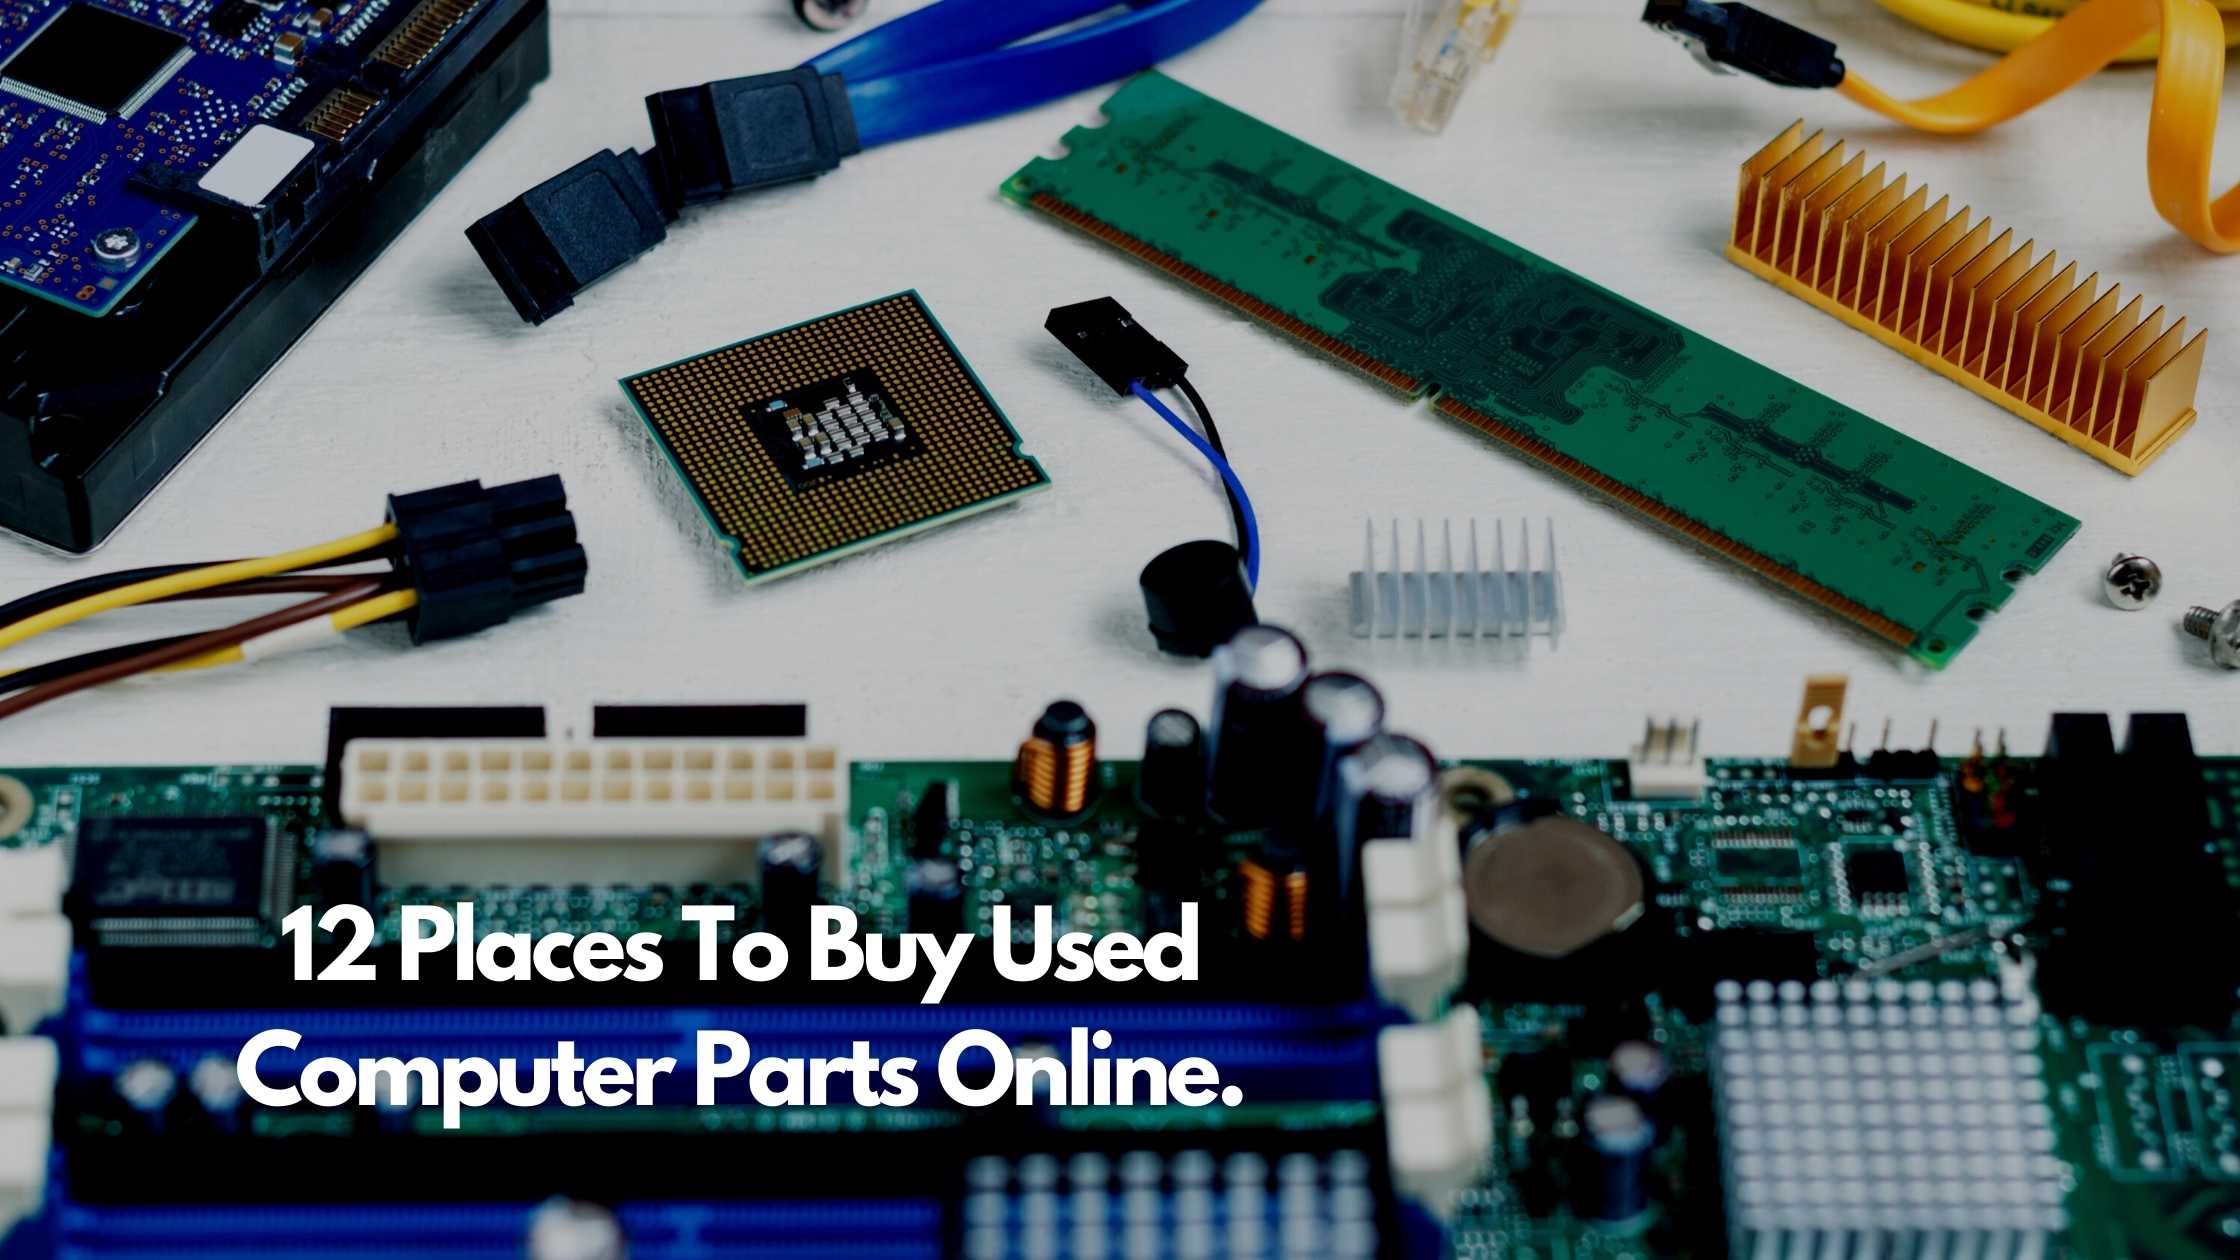 Sell Computer Parts For Cash | We Buy Used PC Parts